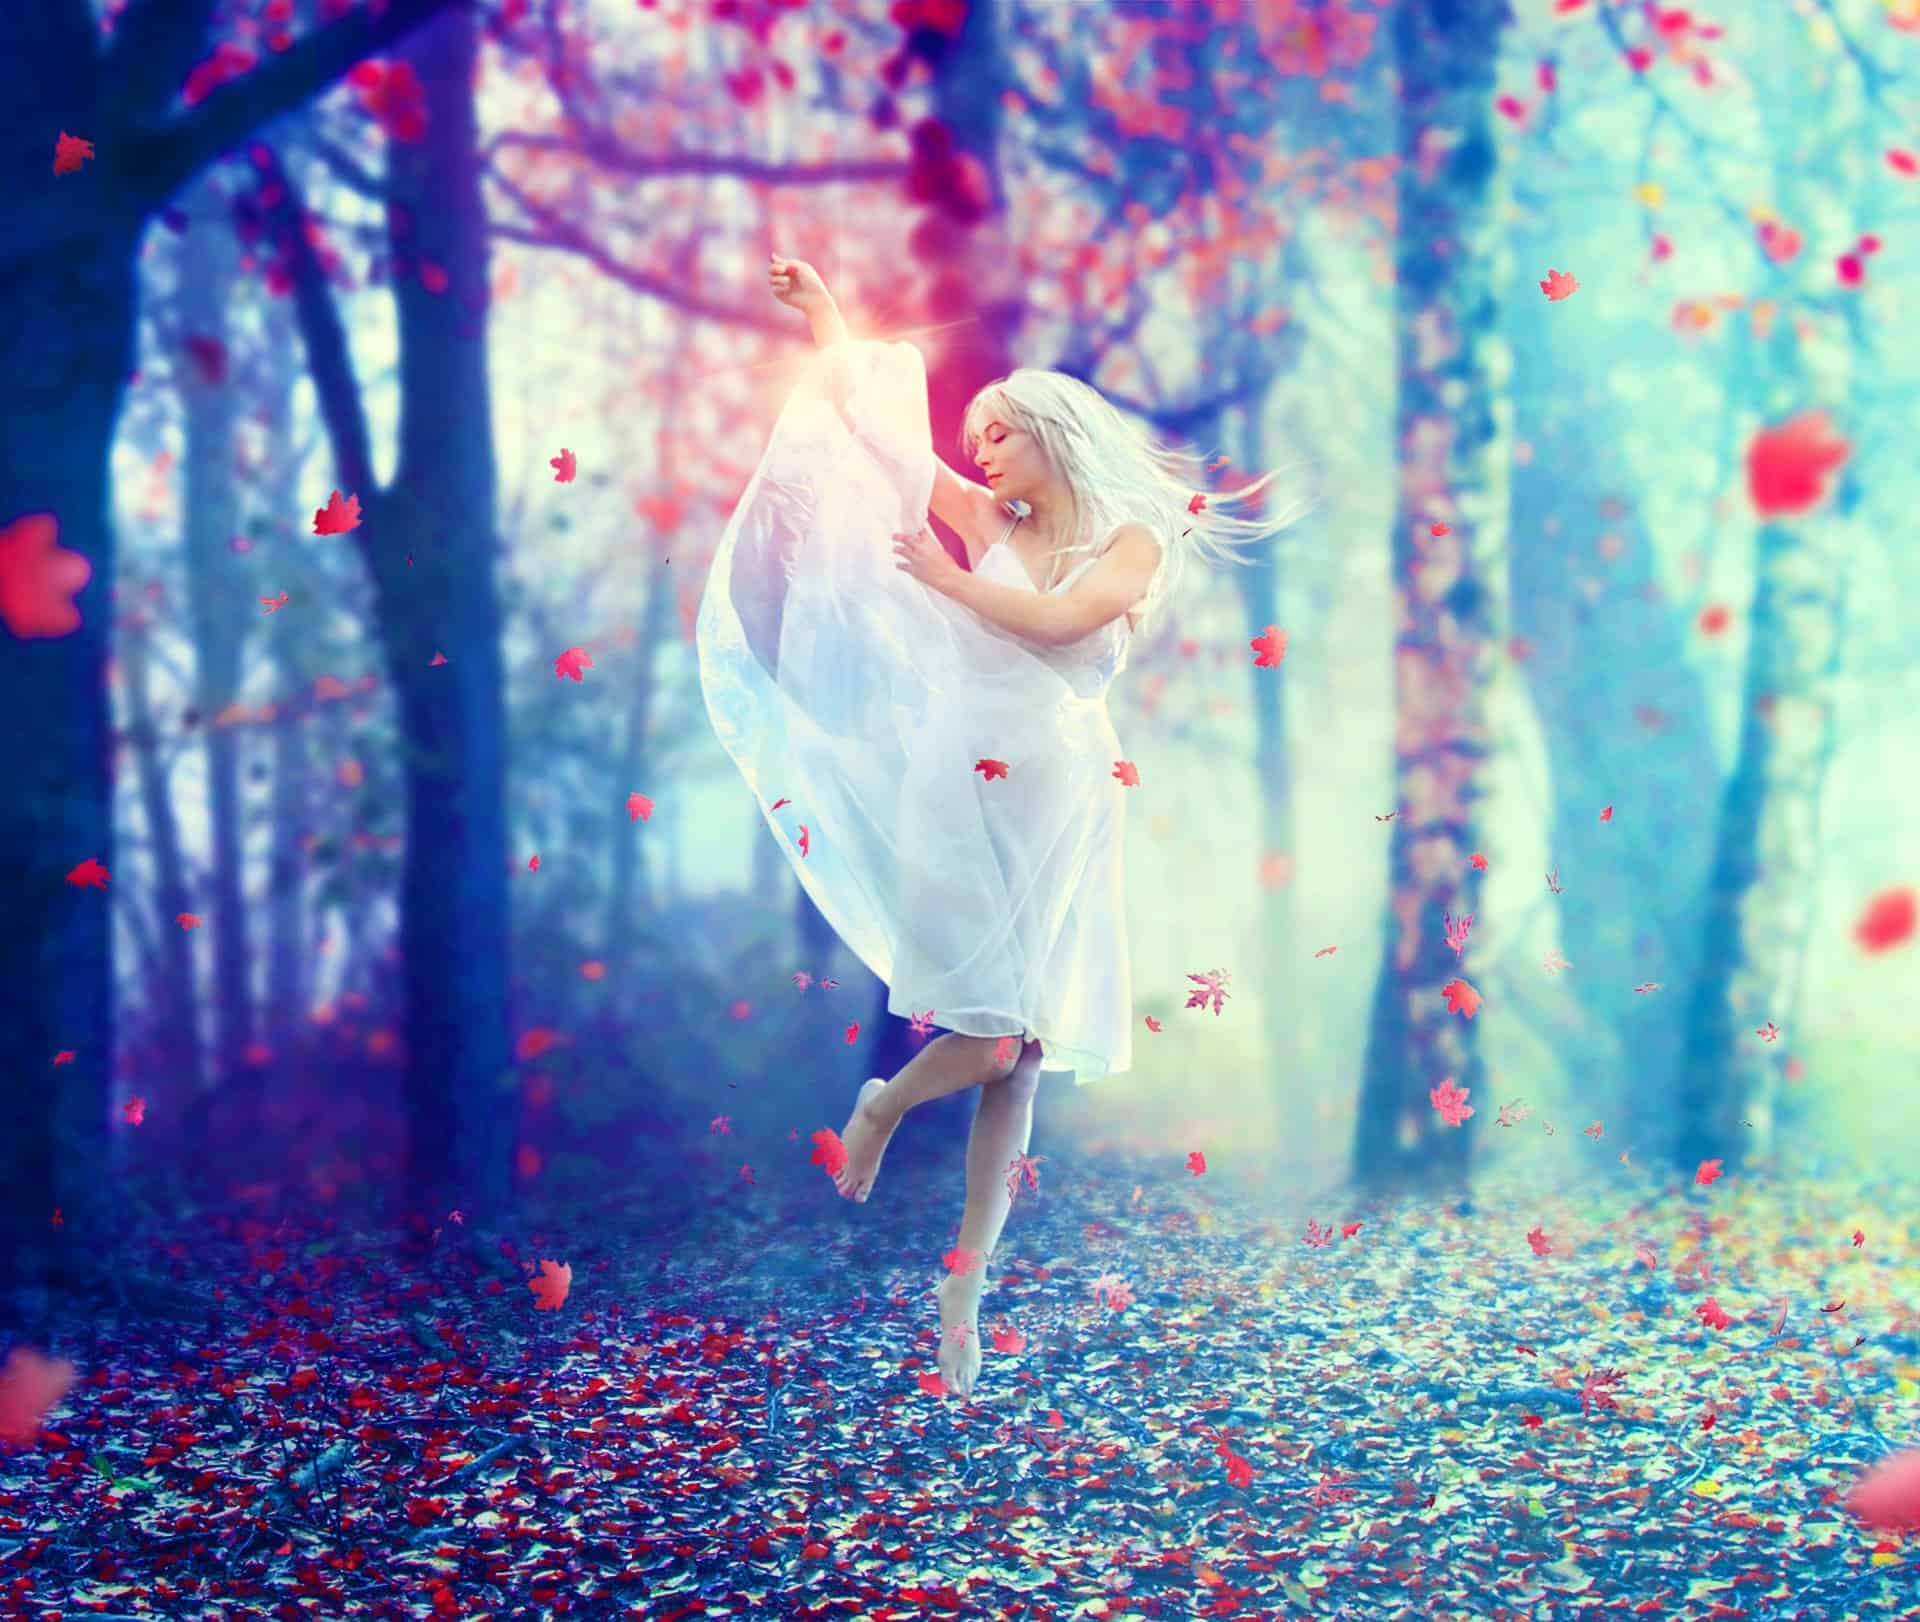 Create a Photo Manipulation of an Emotional Dancer in a Forest